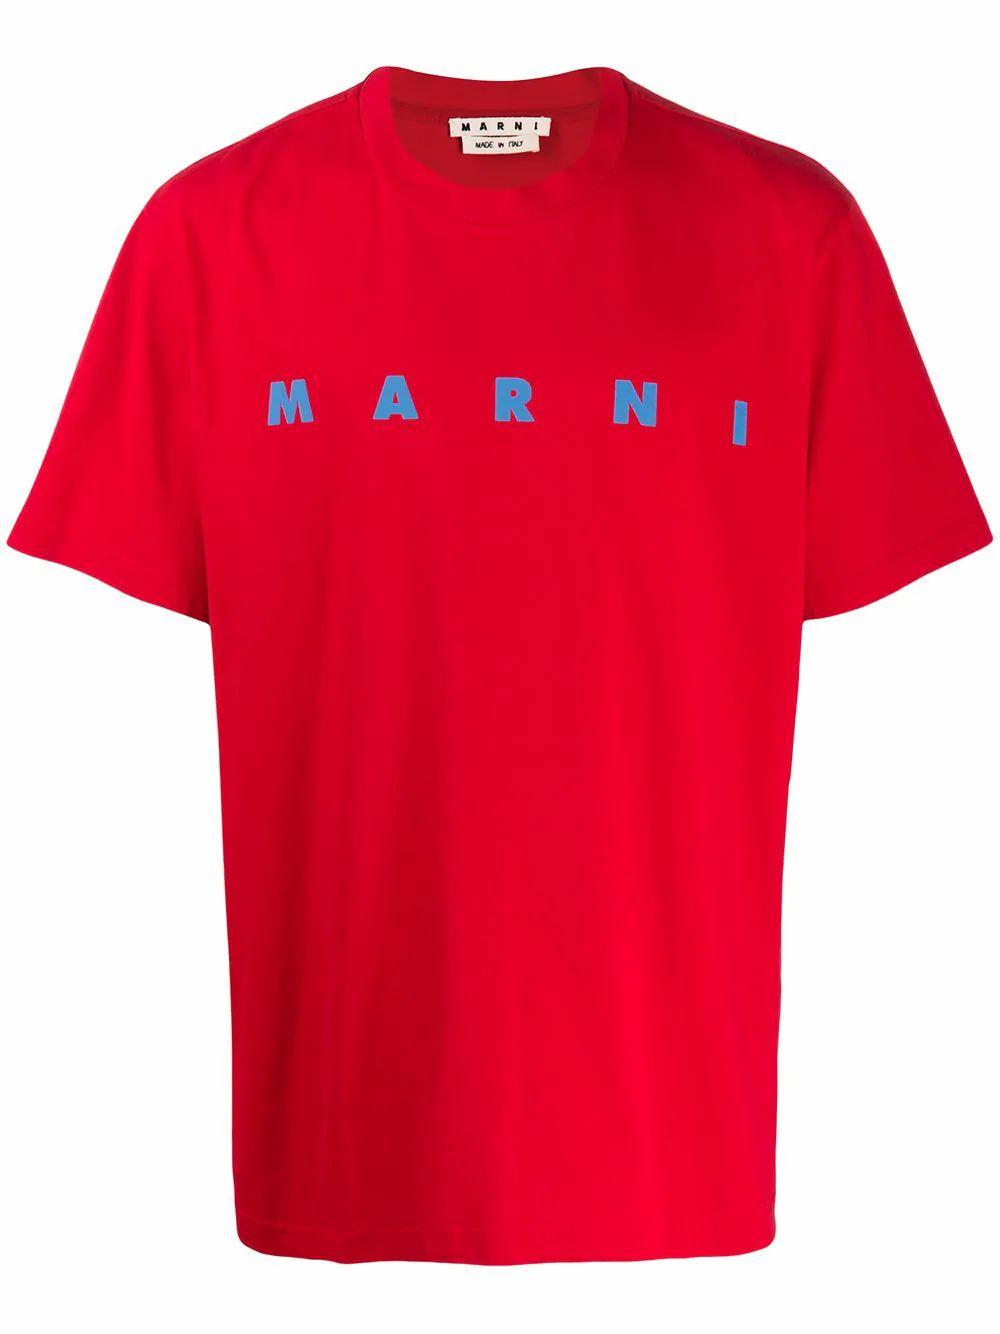 Marni Cotton T-shirt in Red for Men - Lyst